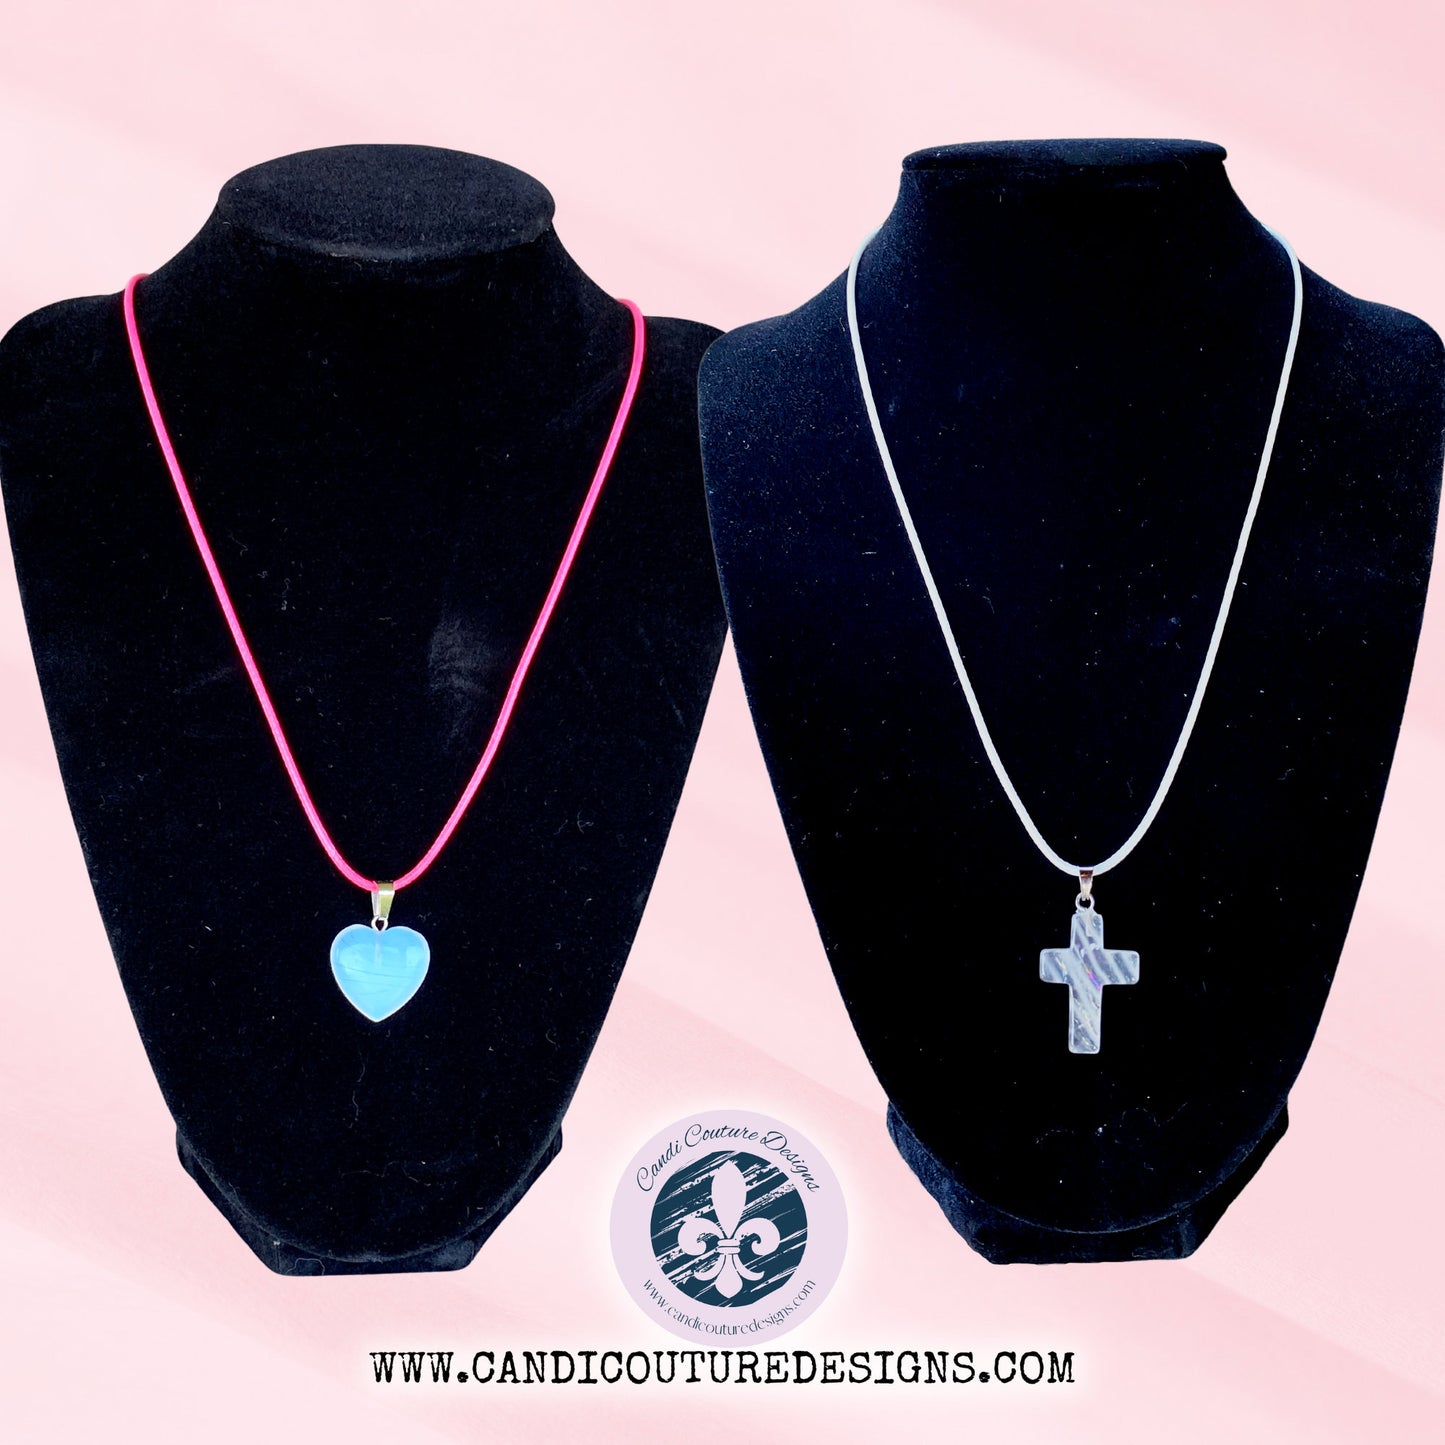 Stylish waxed cord necklace with heart pendant